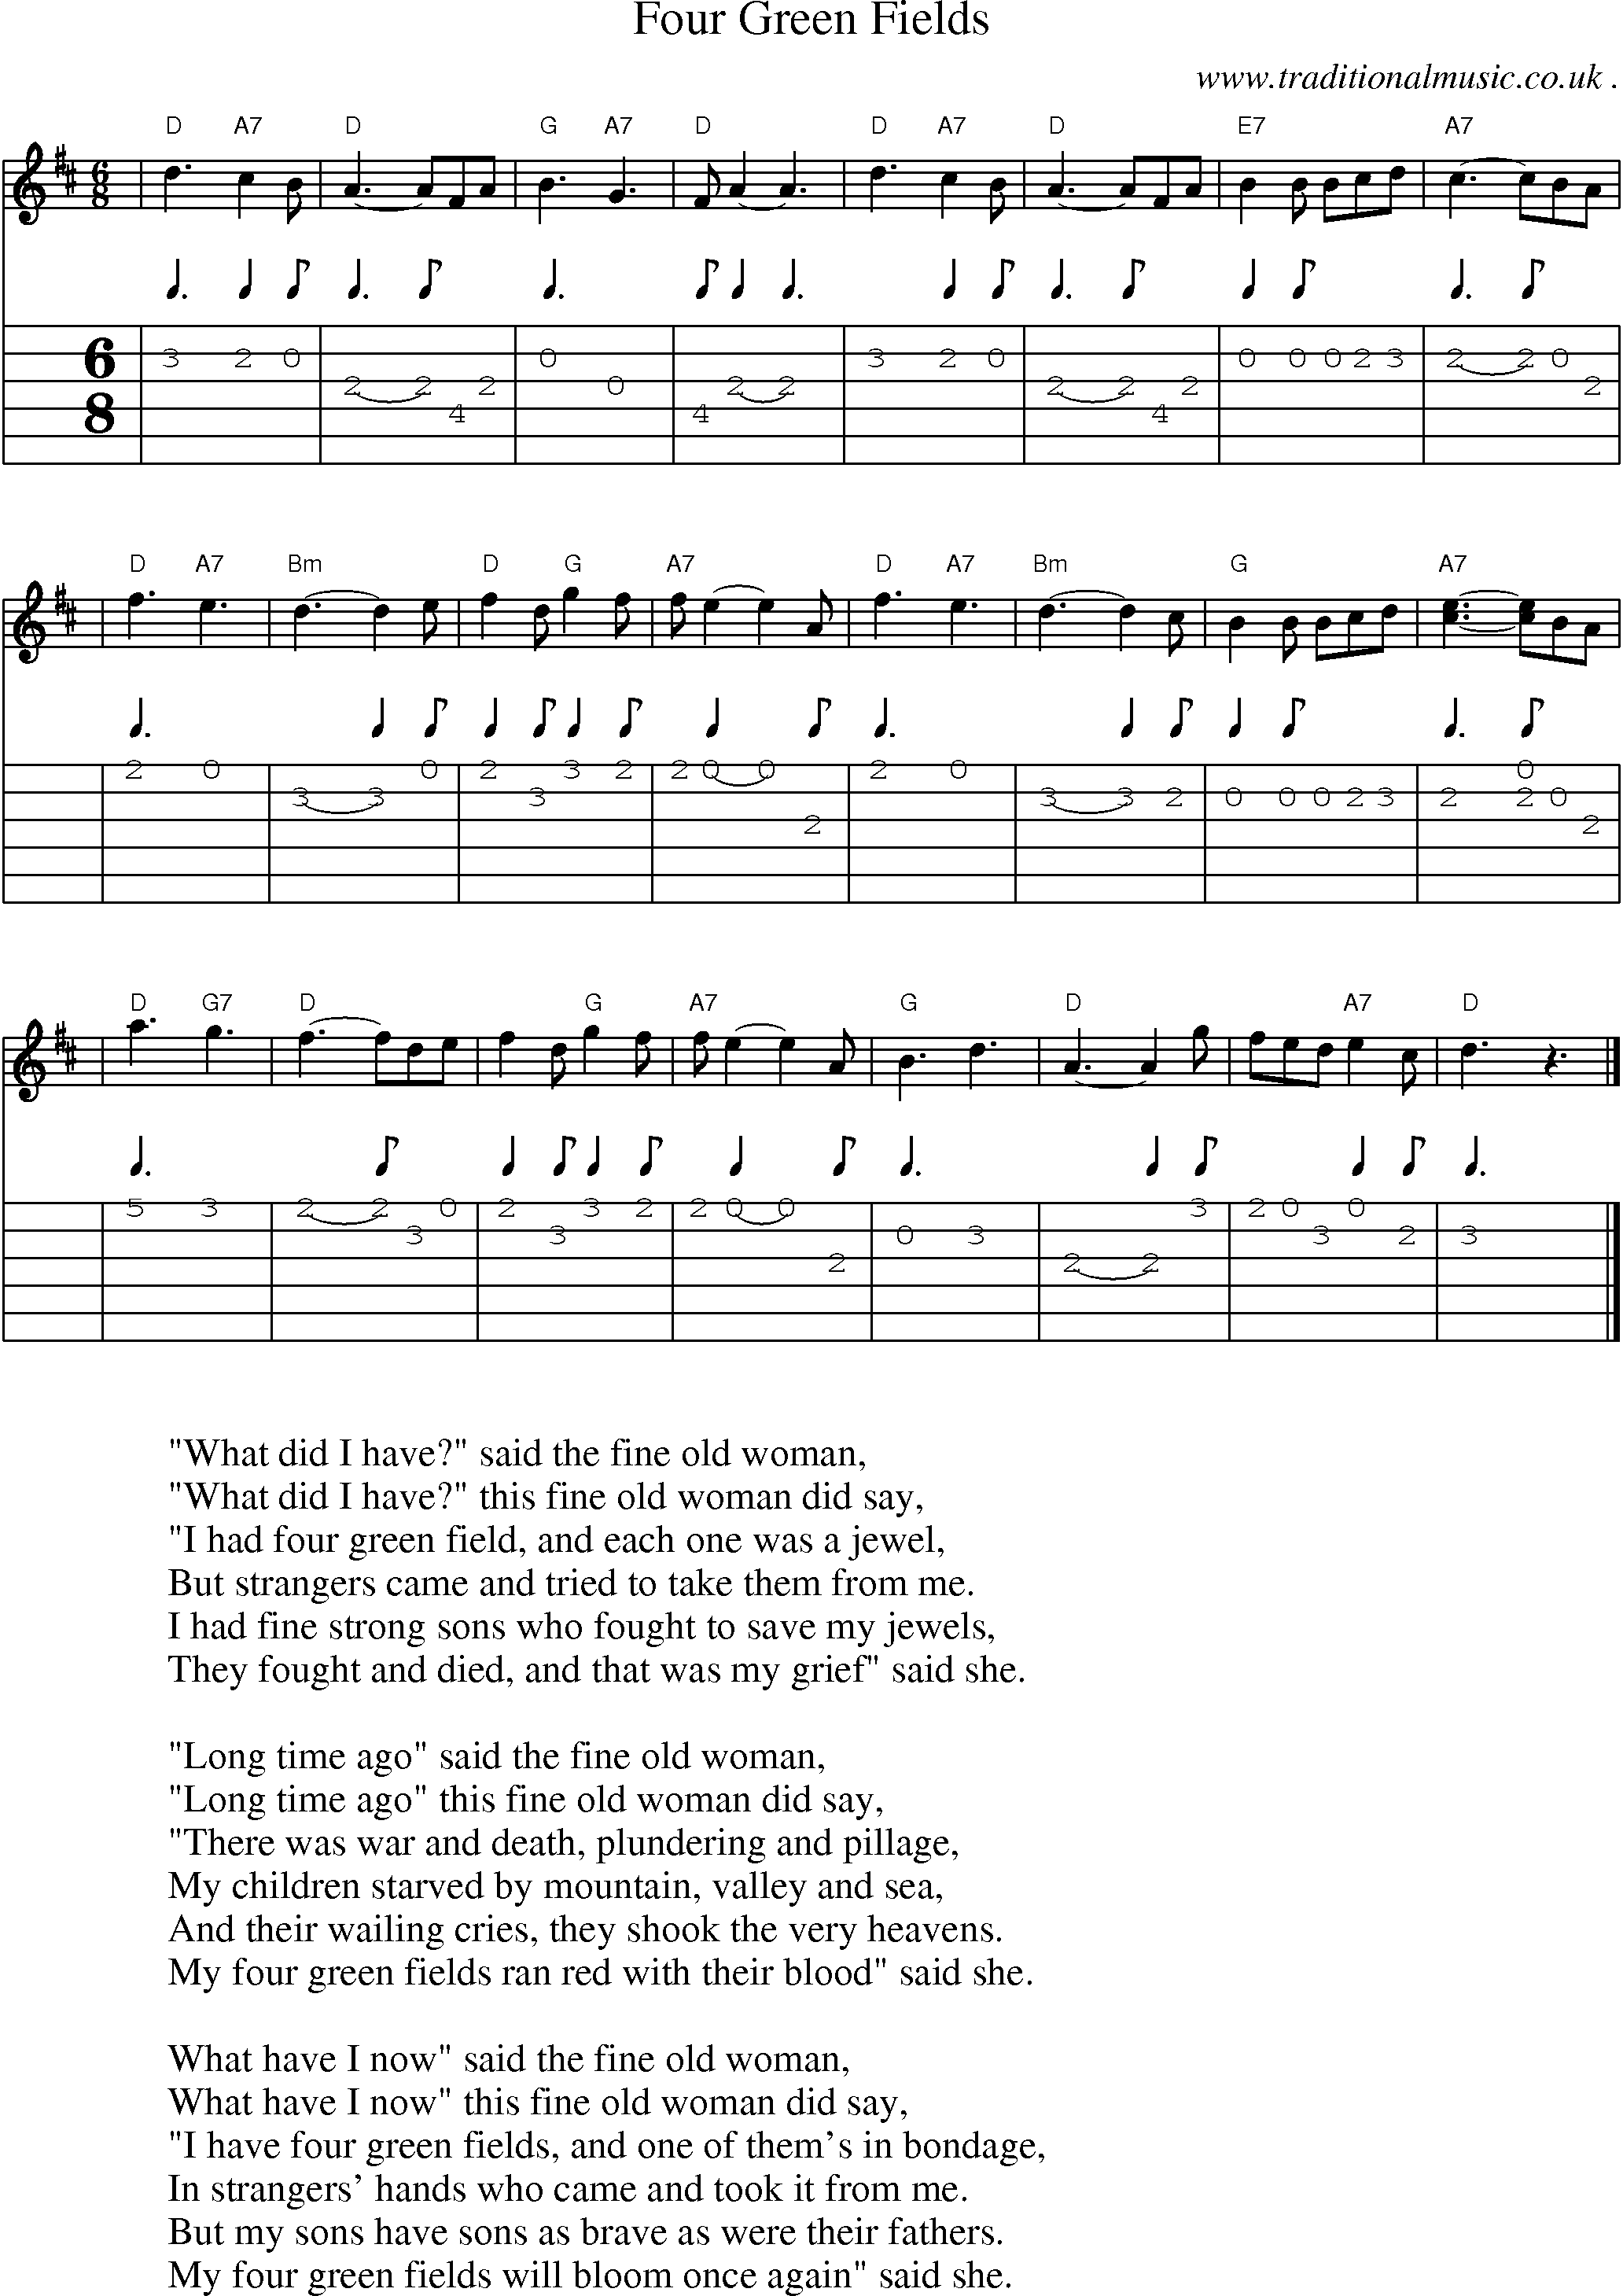 Sheet-music  score, Chords and Guitar Tabs for Four Green Fields